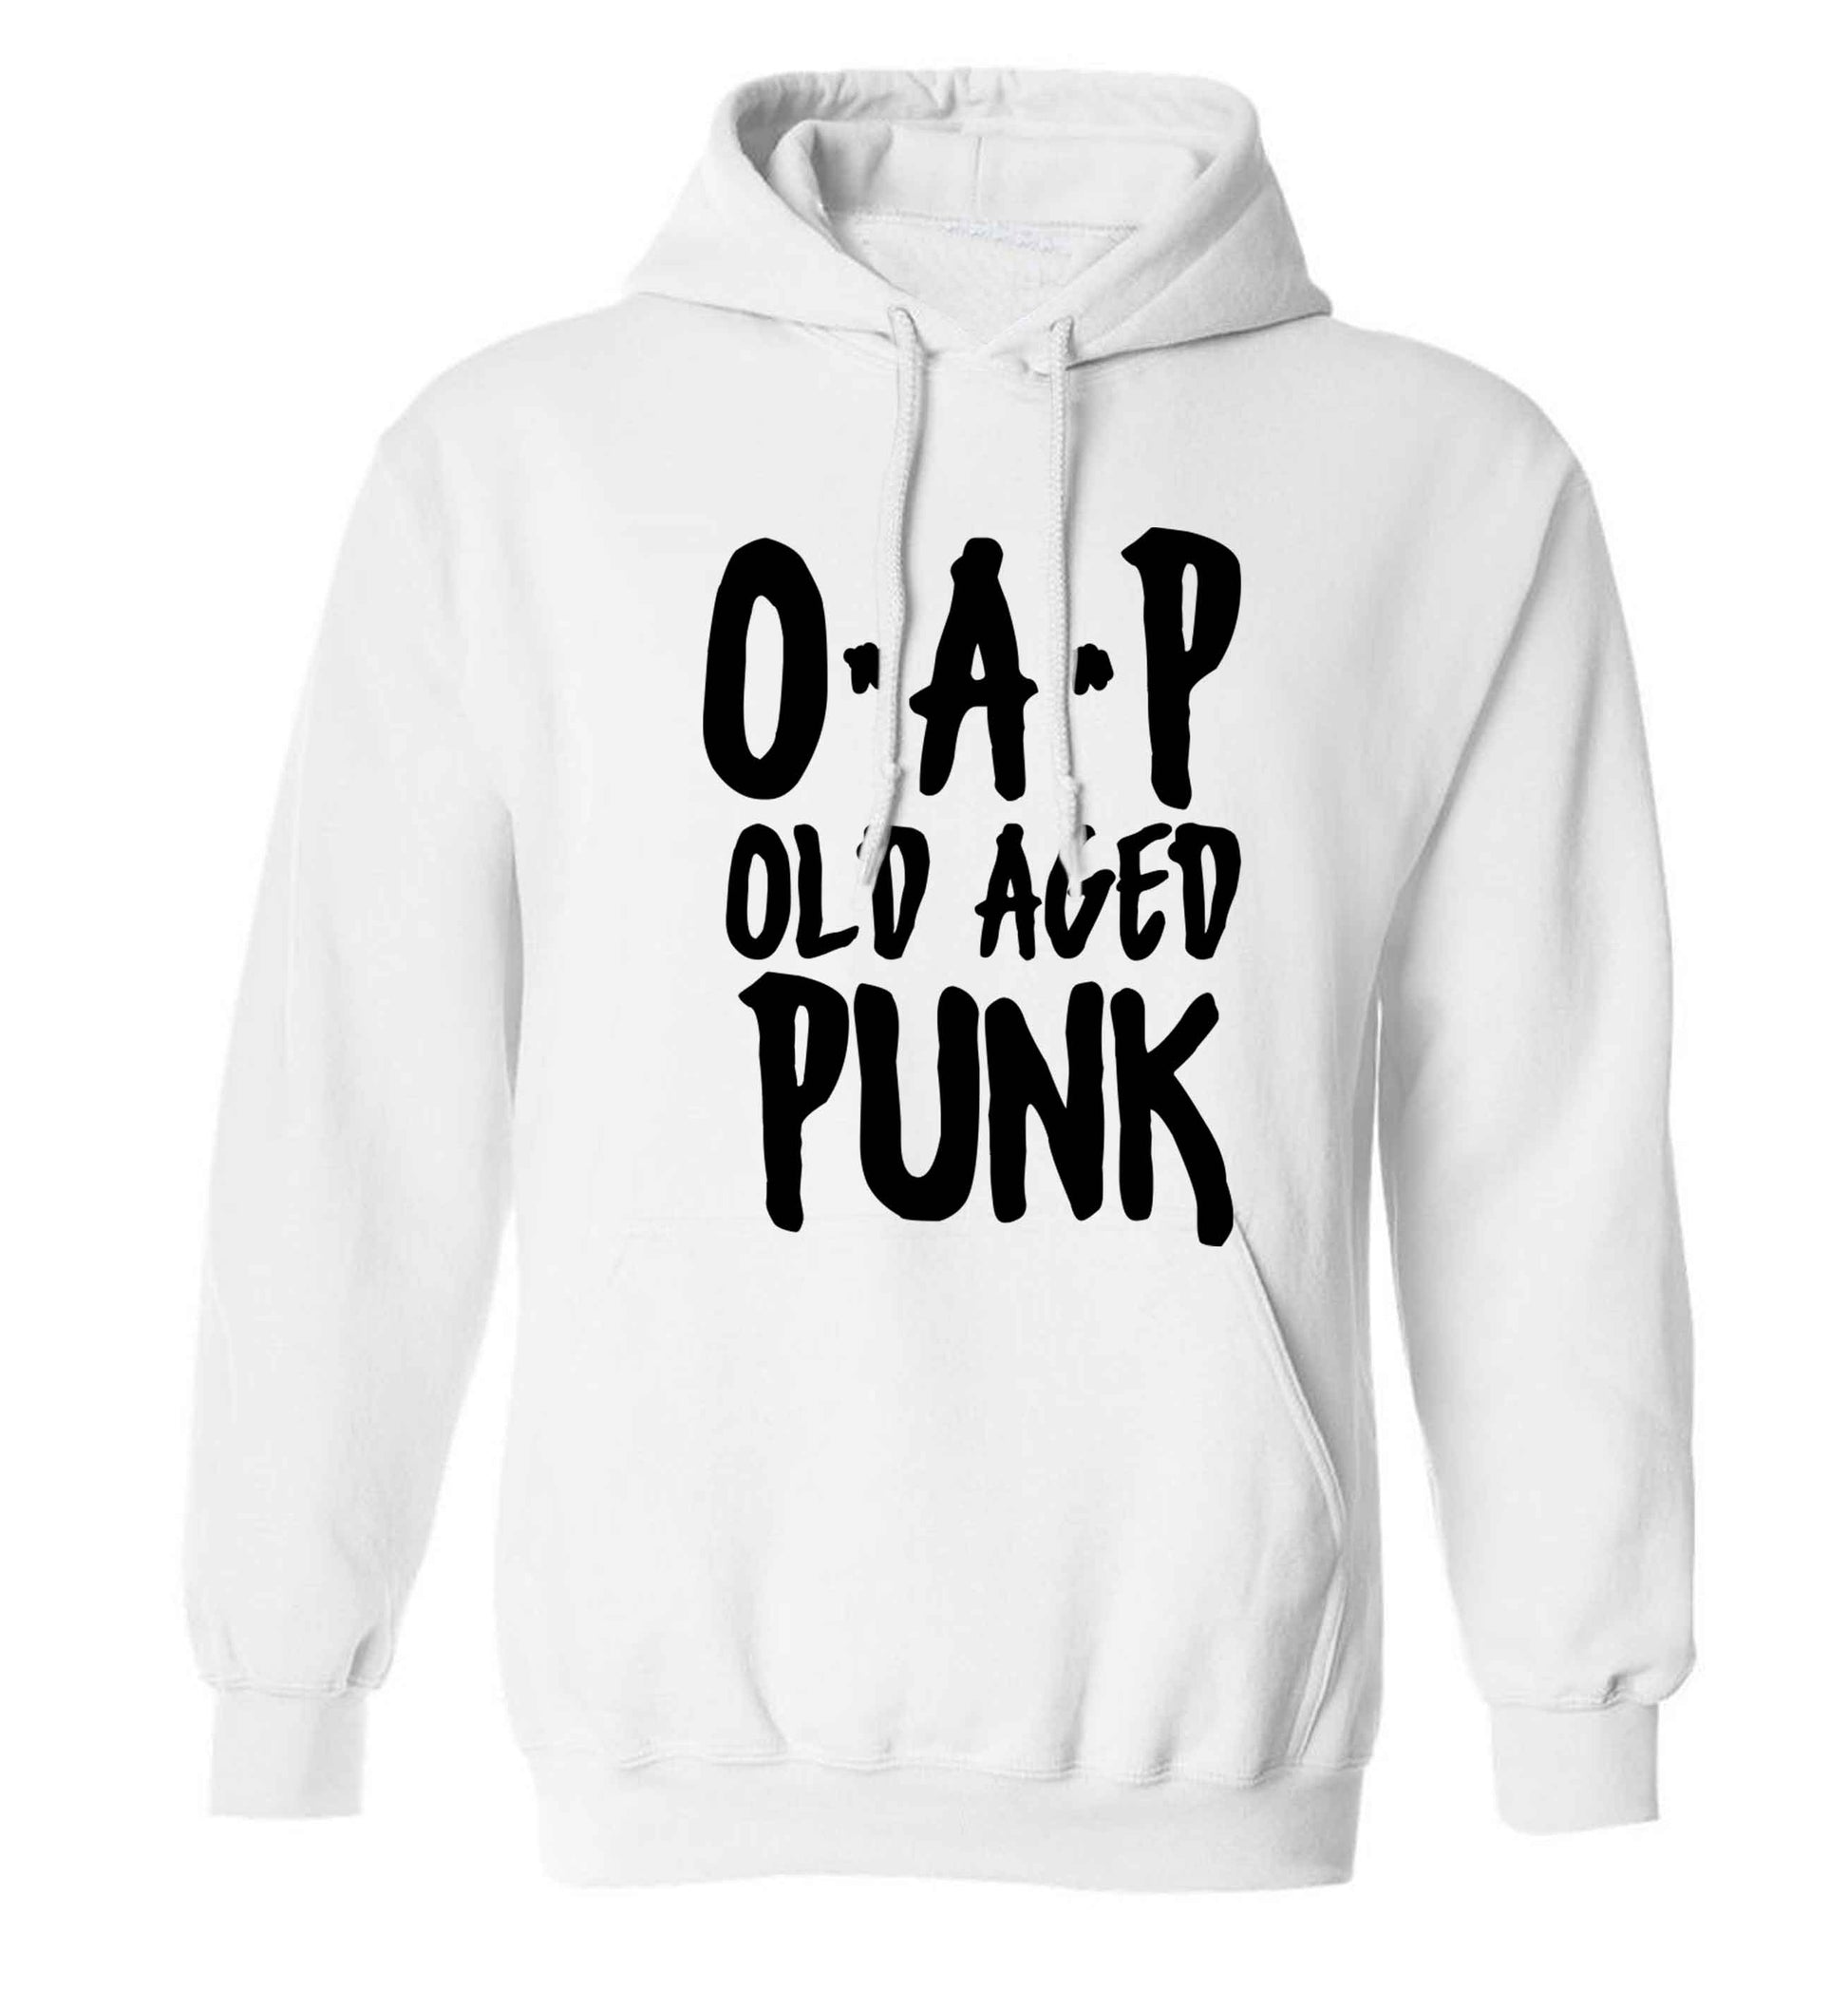 O.A.P Old Age Punk adults unisex white hoodie 2XL